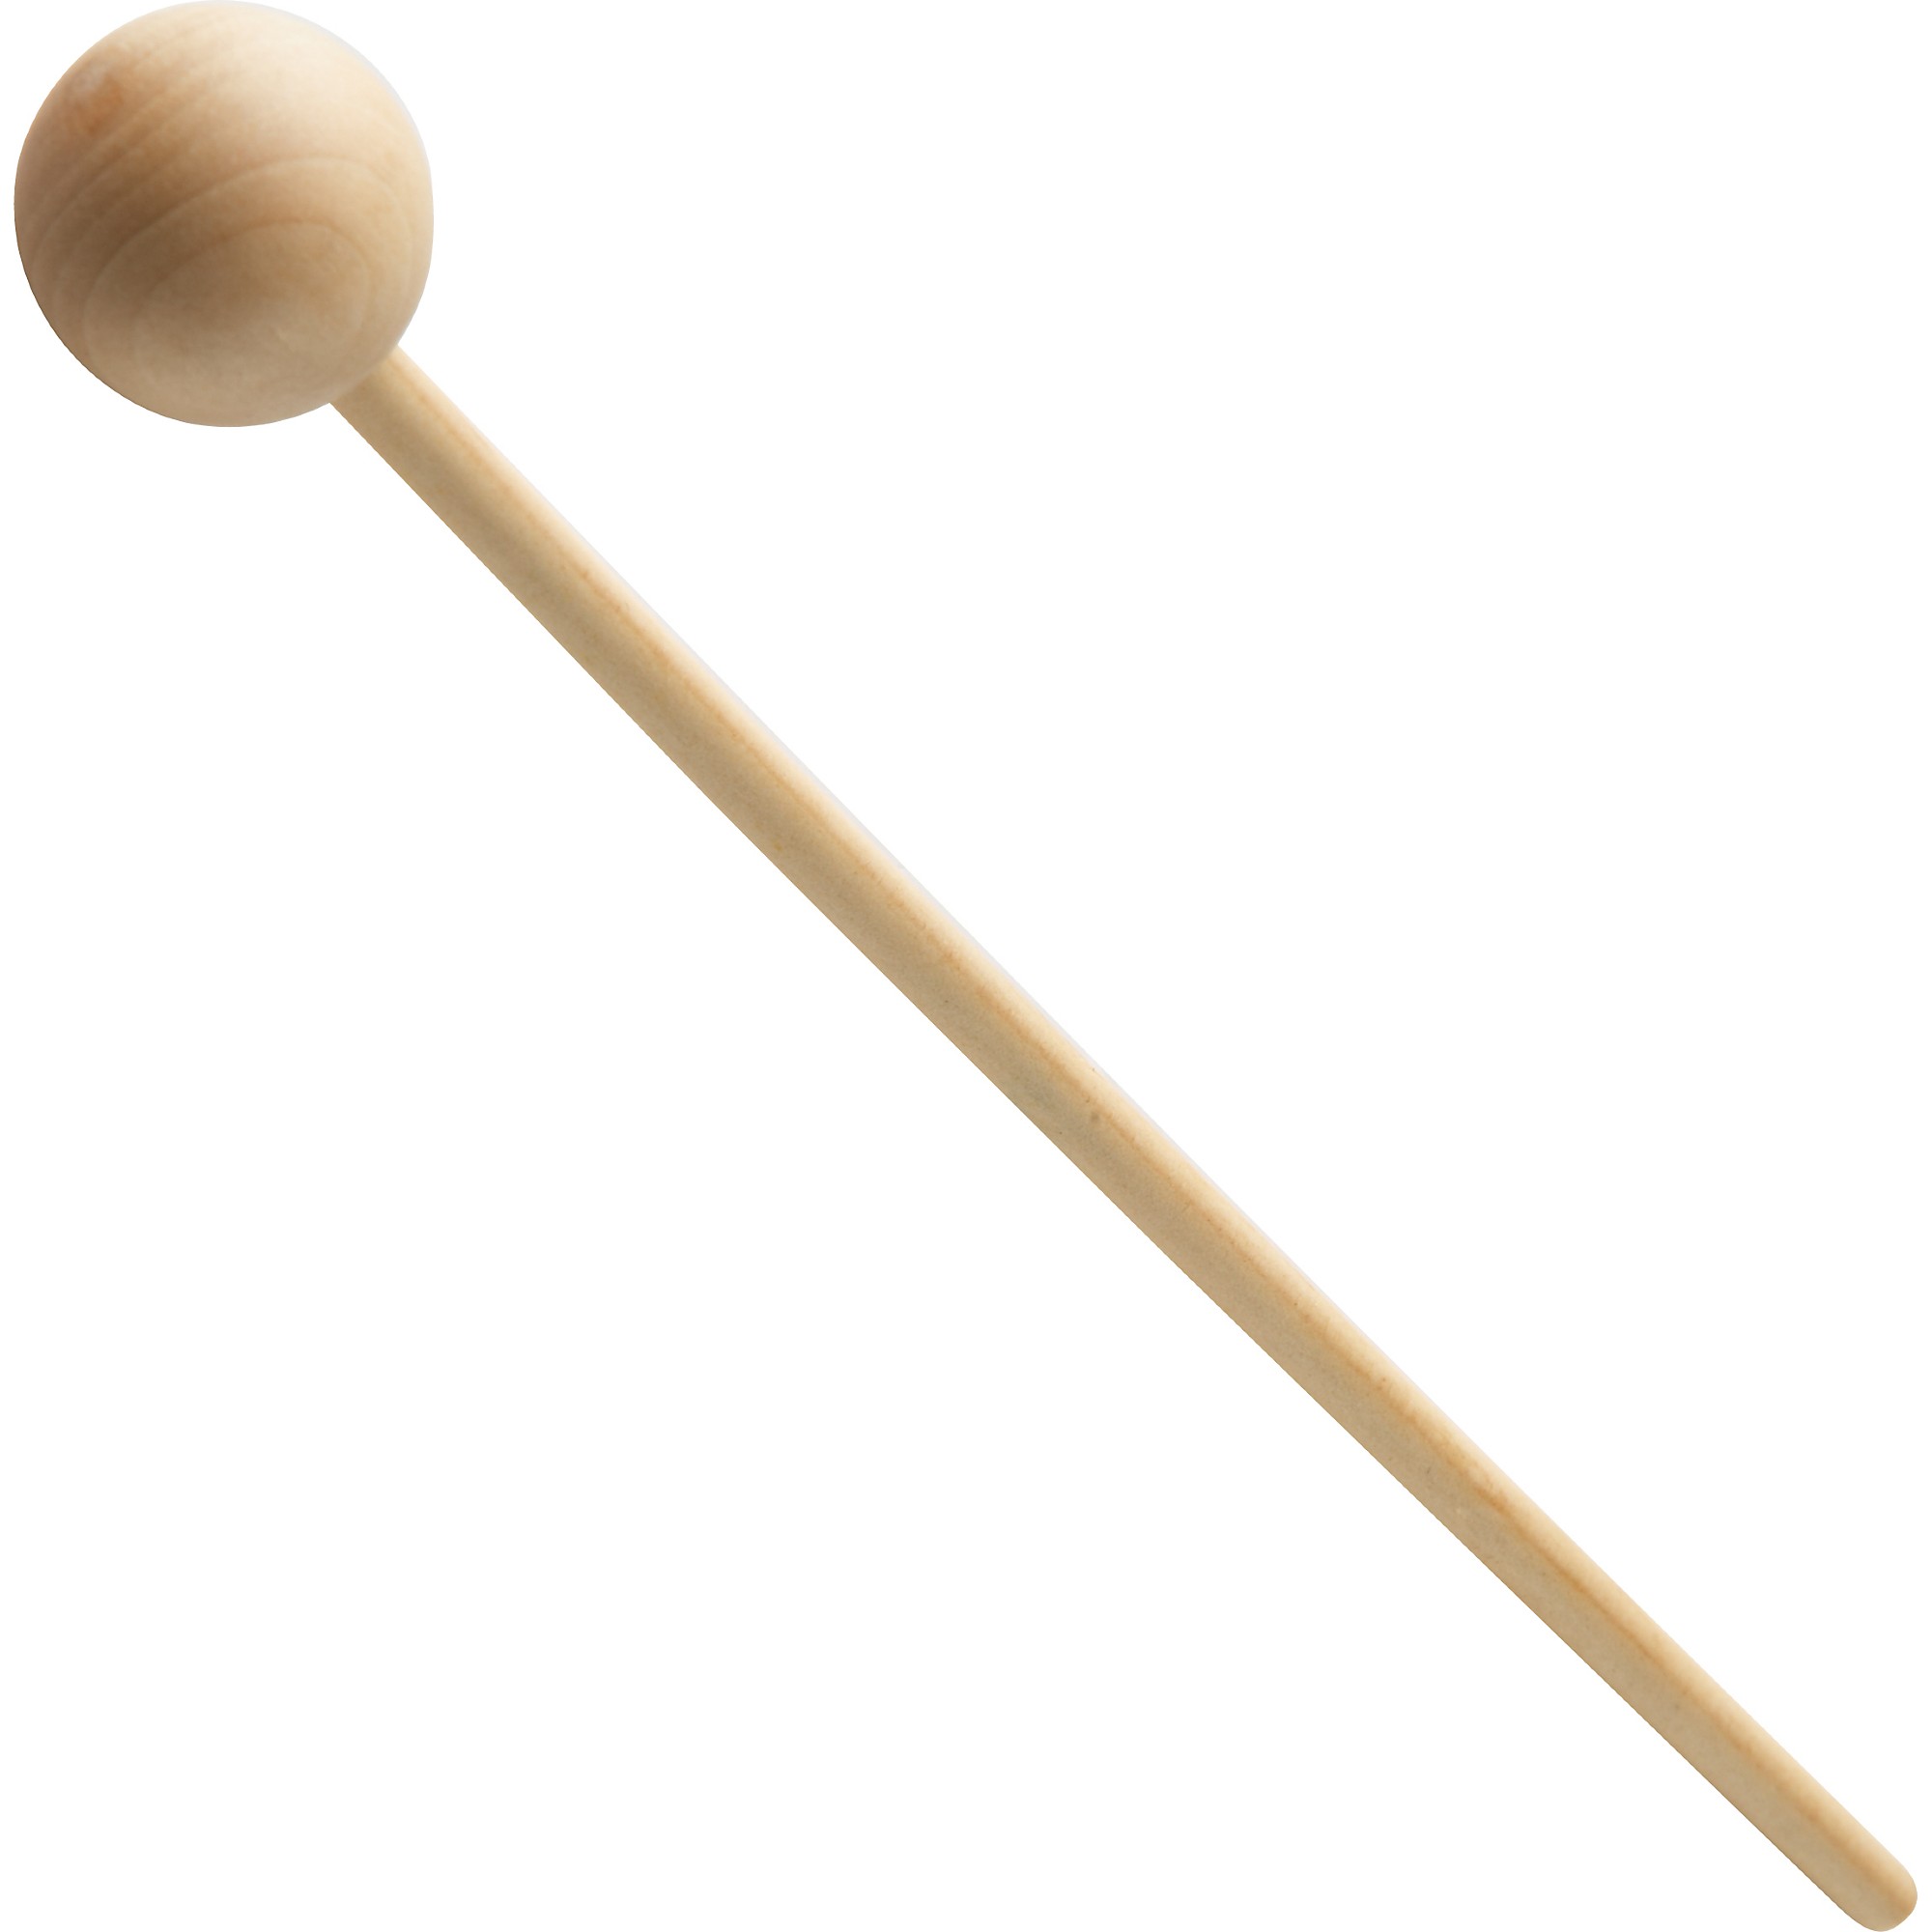 Marimba Mallets 1 Pair Keyboard Instrument Mallets Wooden Handle Rubber Heads Percussion Music Instrument Drumsticks 